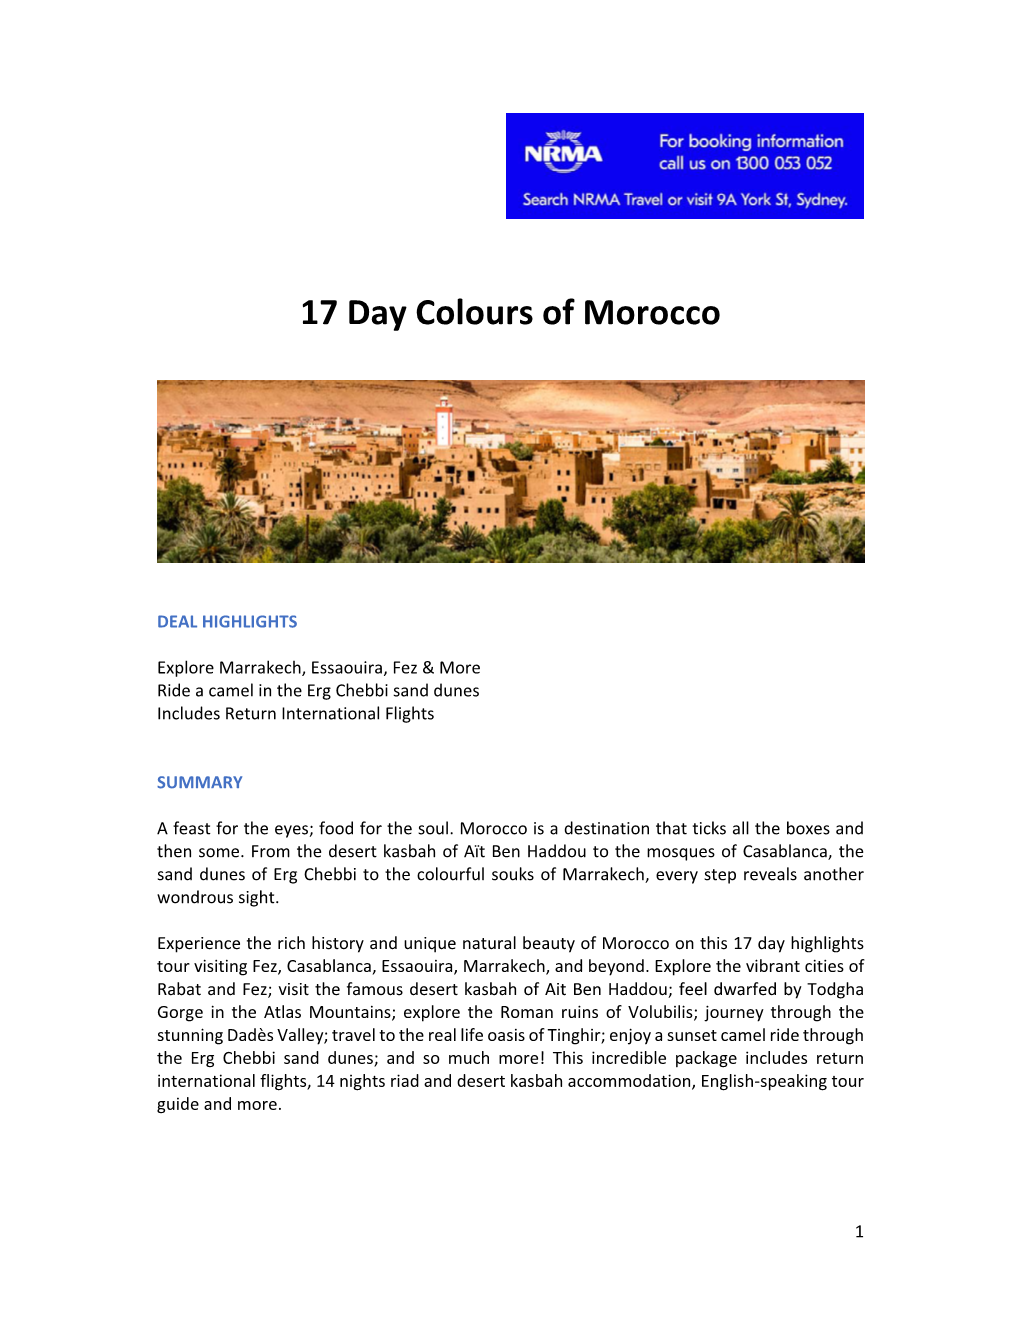 Colours of Morocco Itinerary